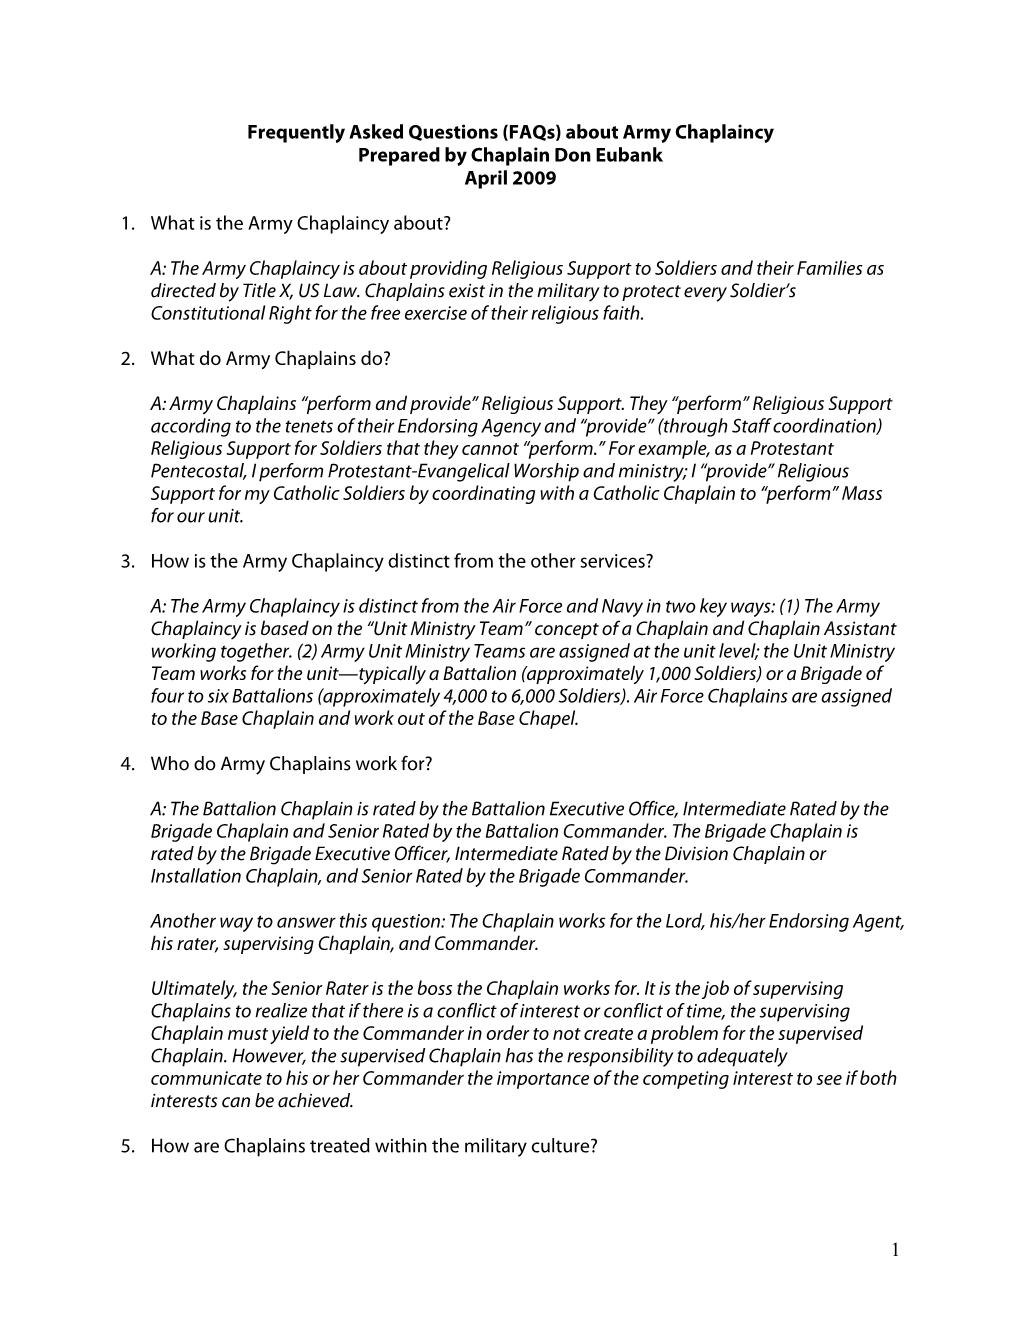 (Faqs) About Army Chaplaincy Prepared by Chaplain Don Eubank April 2009